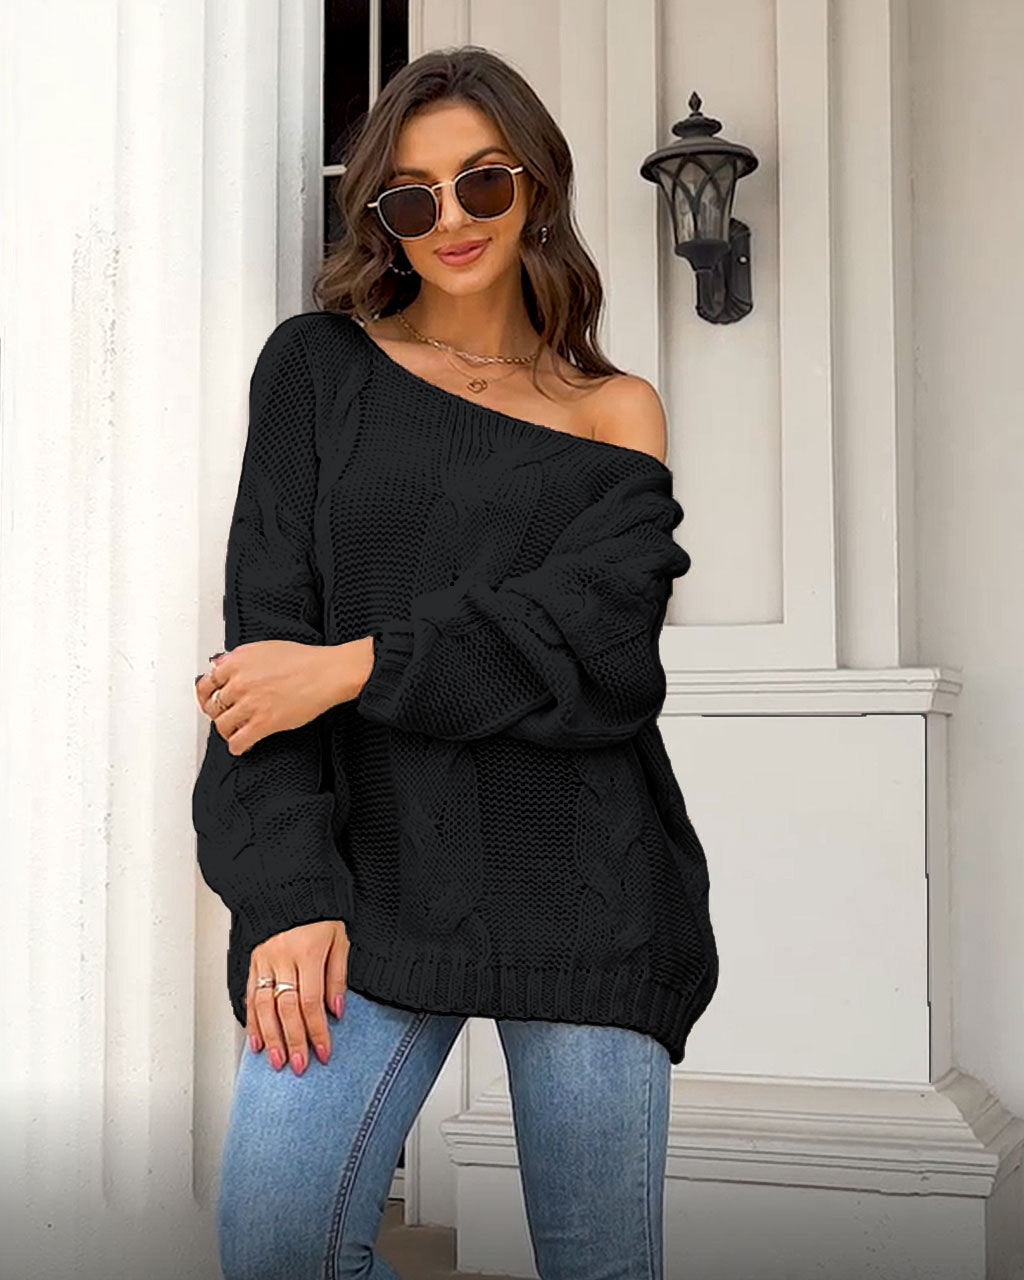 Women Autumn Winter Loose Sweater Round Neck Solid Color Pullover Sweater Women